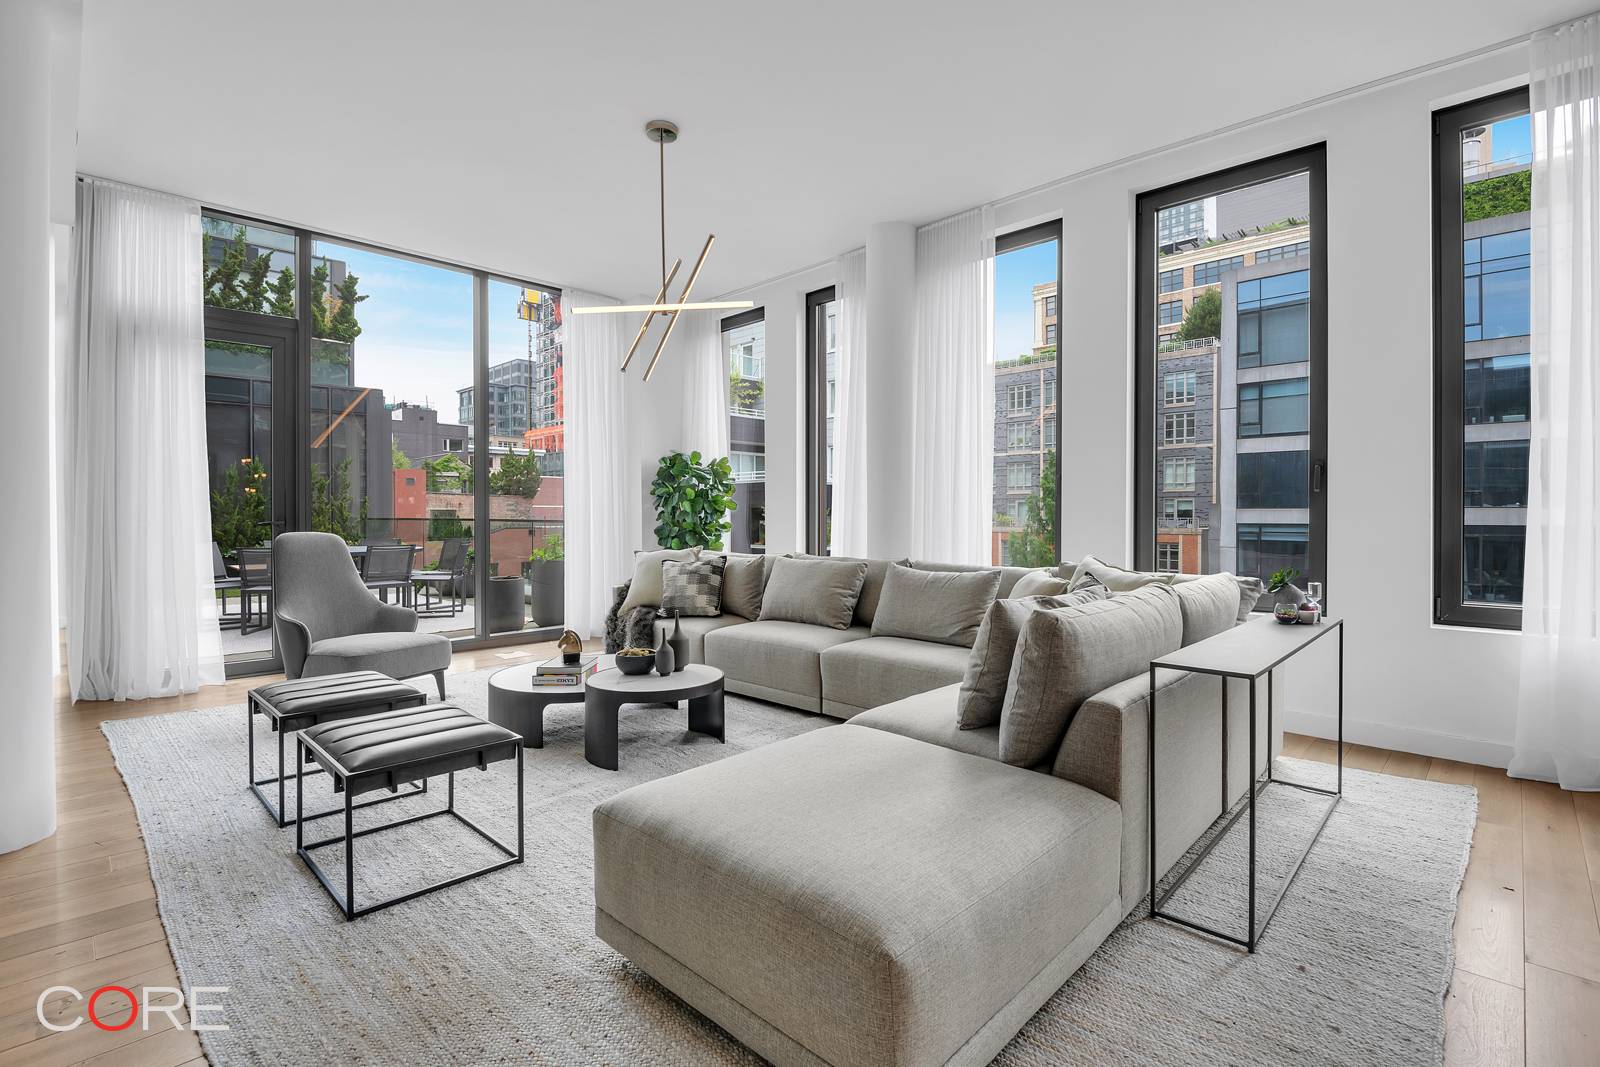 Penthouse 3 at 15 Renwick features a 4 bedroom, 5 bathroom layout with an open flow living room, sprawling terraces and oversized windows throughout.